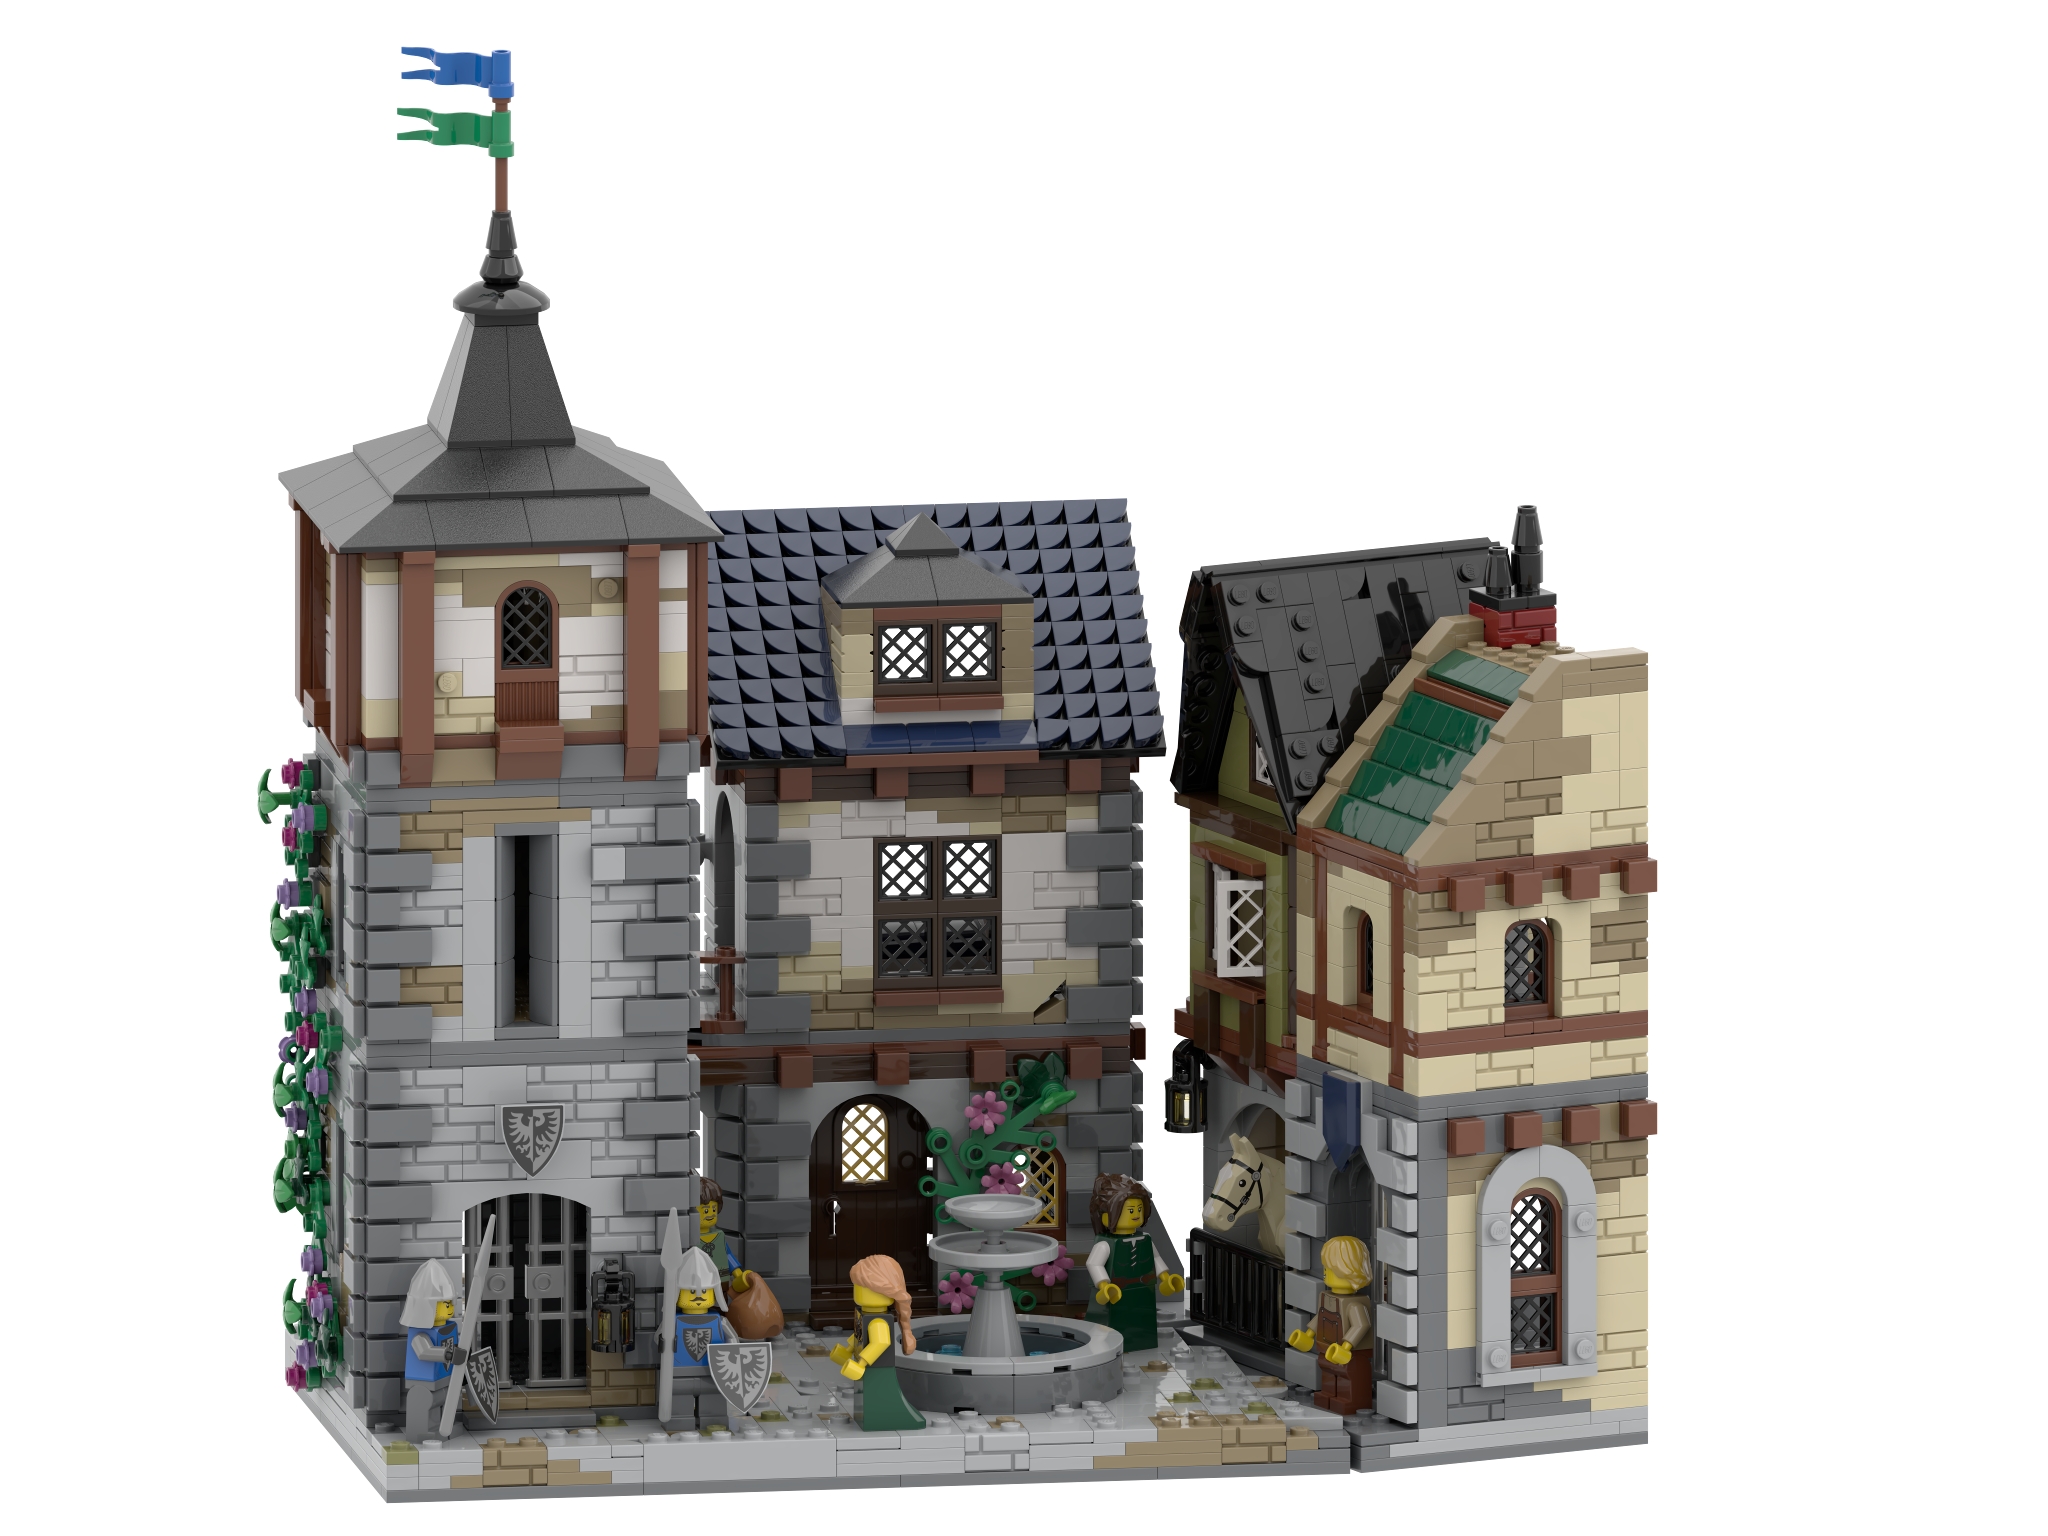 New Medieval Town Square! 3,304 pieces,March $229.99 USD #lego #medieval  #medievalarchitecture #legos #legophotography #castle…